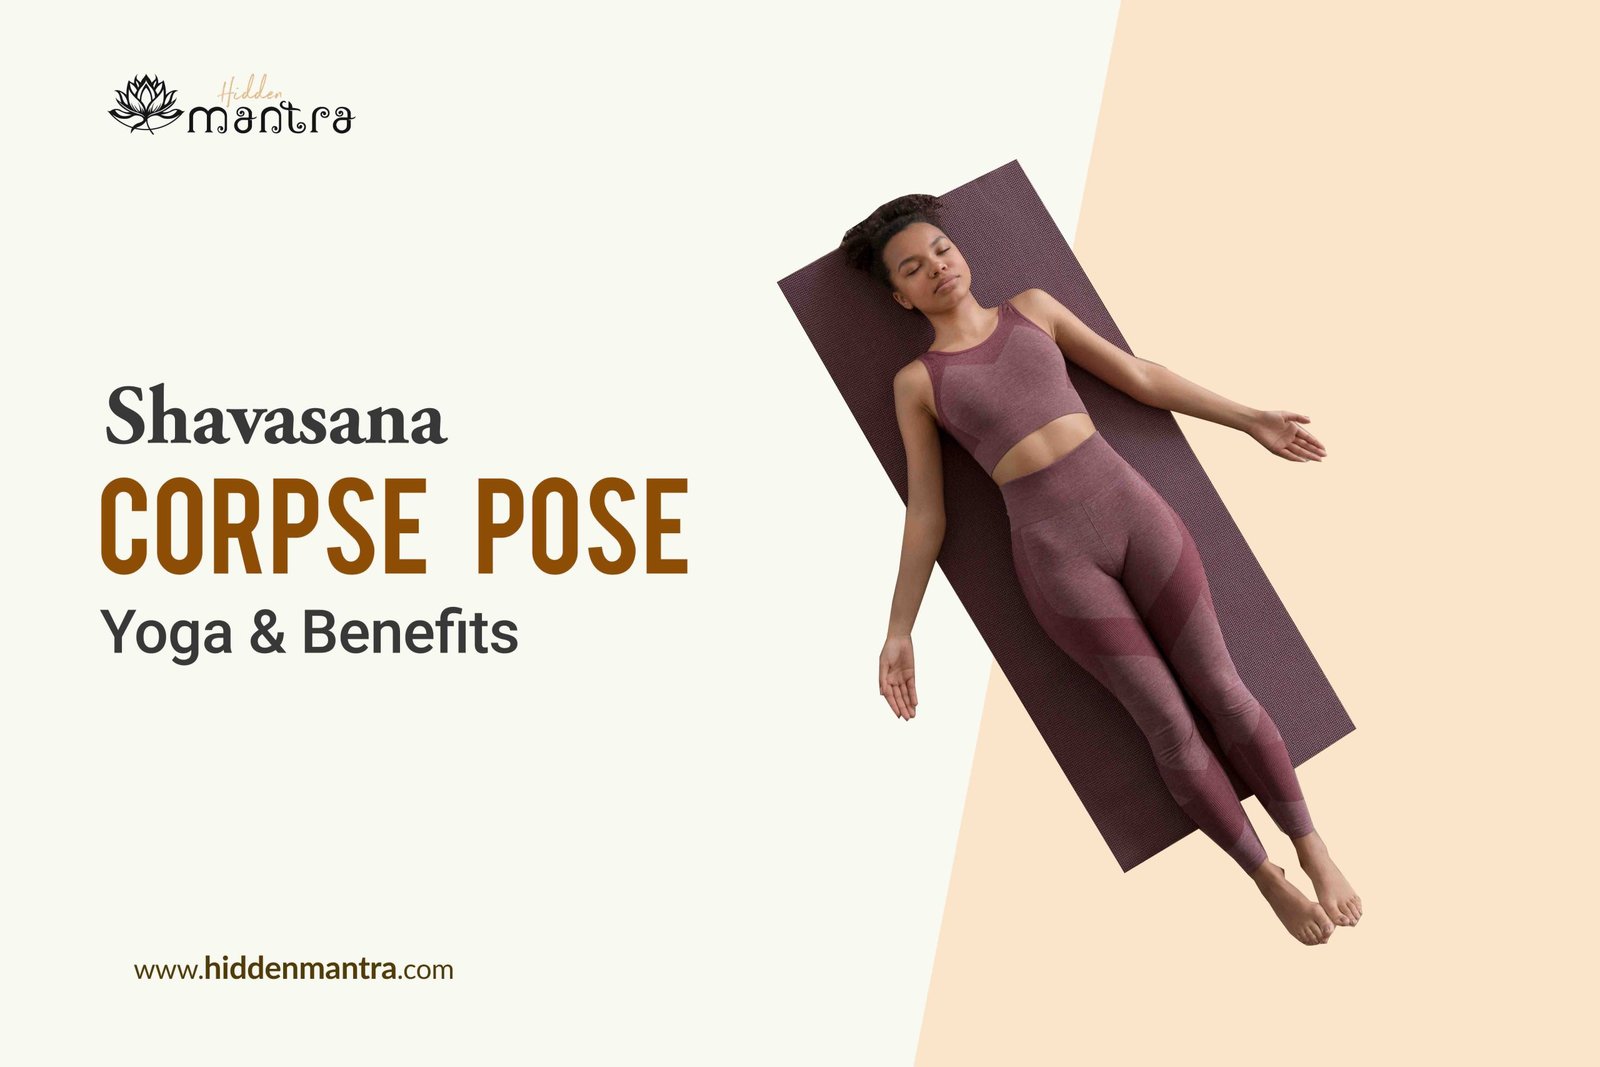 End Your Practice (and Your Week) in Savasana